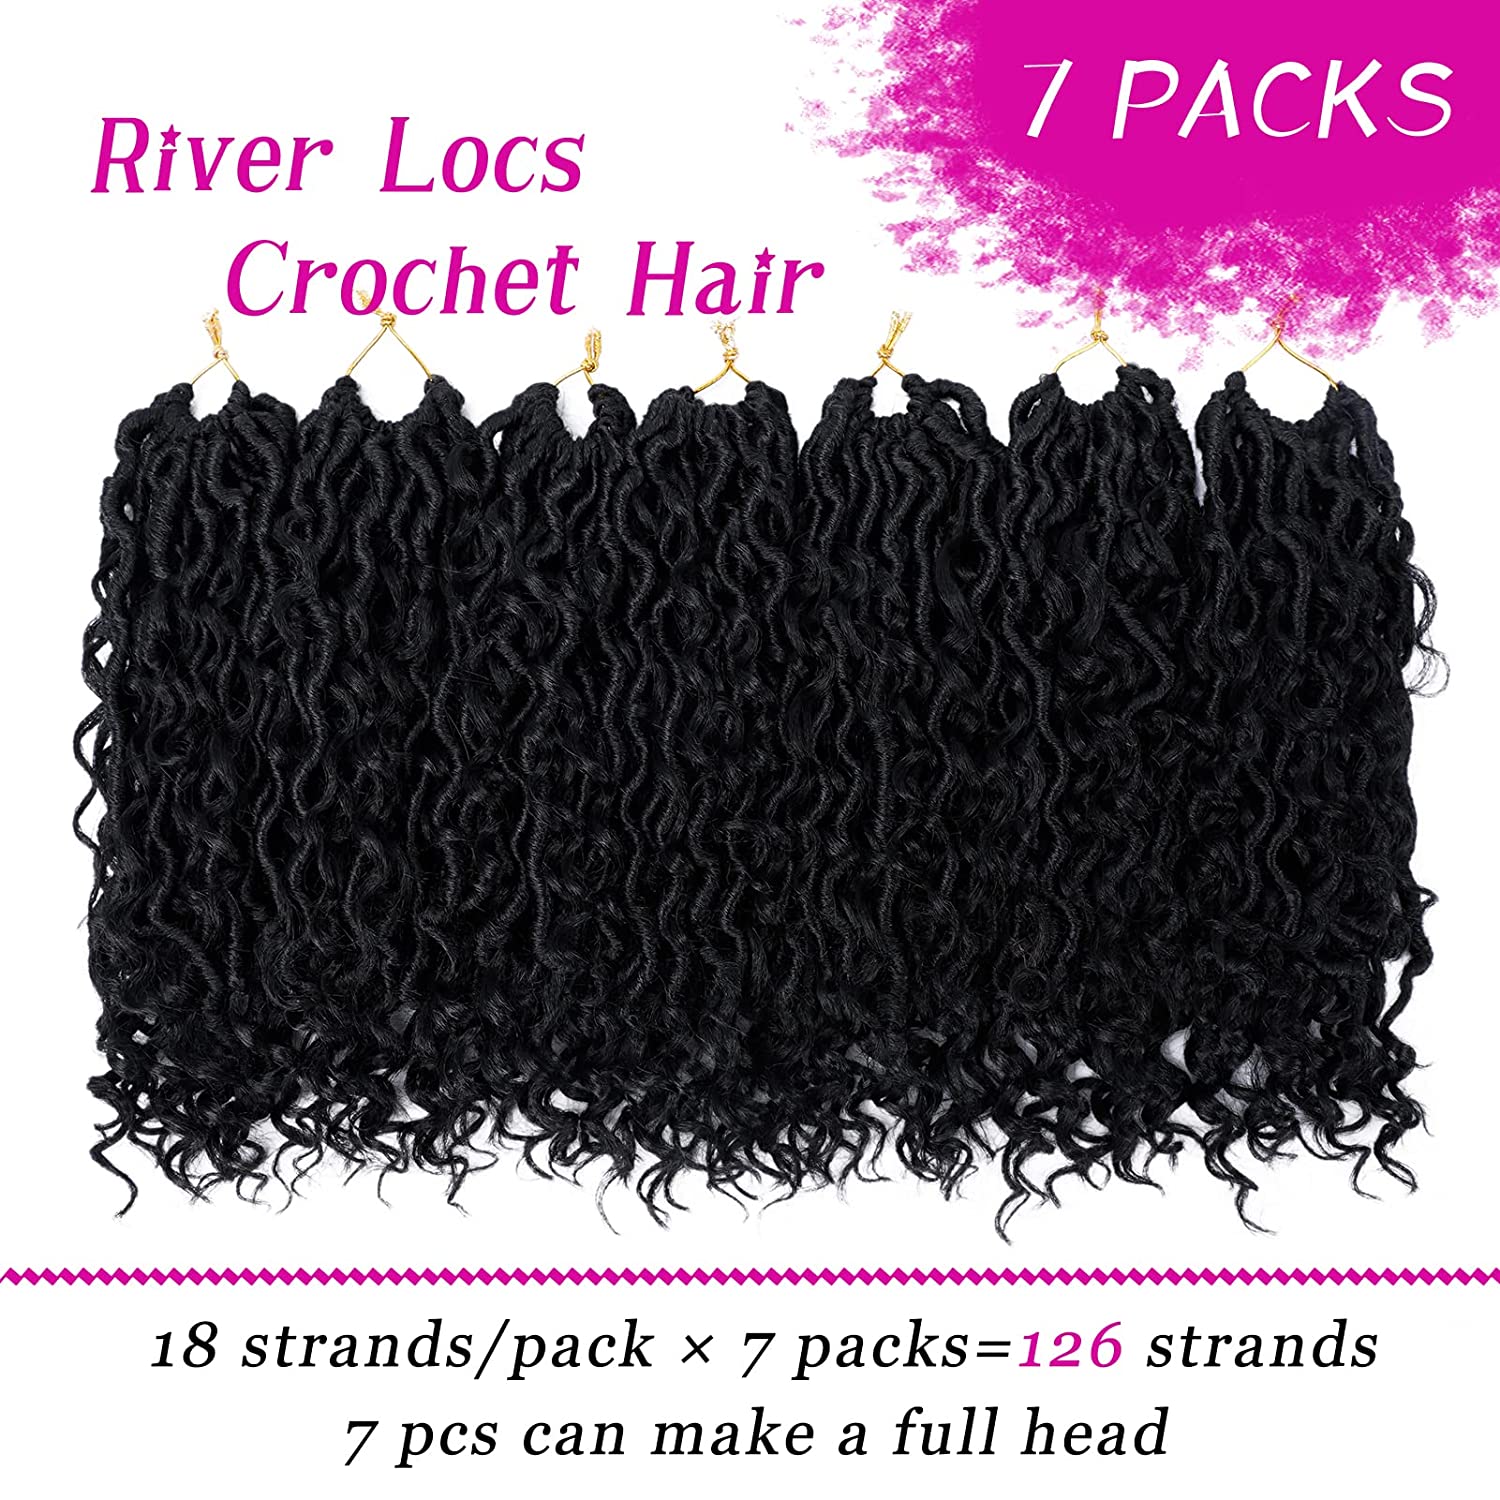 Goddess Locs Crochet Hair 12 Inch 7 Packs River Locs Curly Faux Locs Crochet Hair for Women Pre Looped Crochet Braids with Curly Hair Boho Hippie Locs Synthetic Hair Extensions (#1B) Find Your New Look Today!